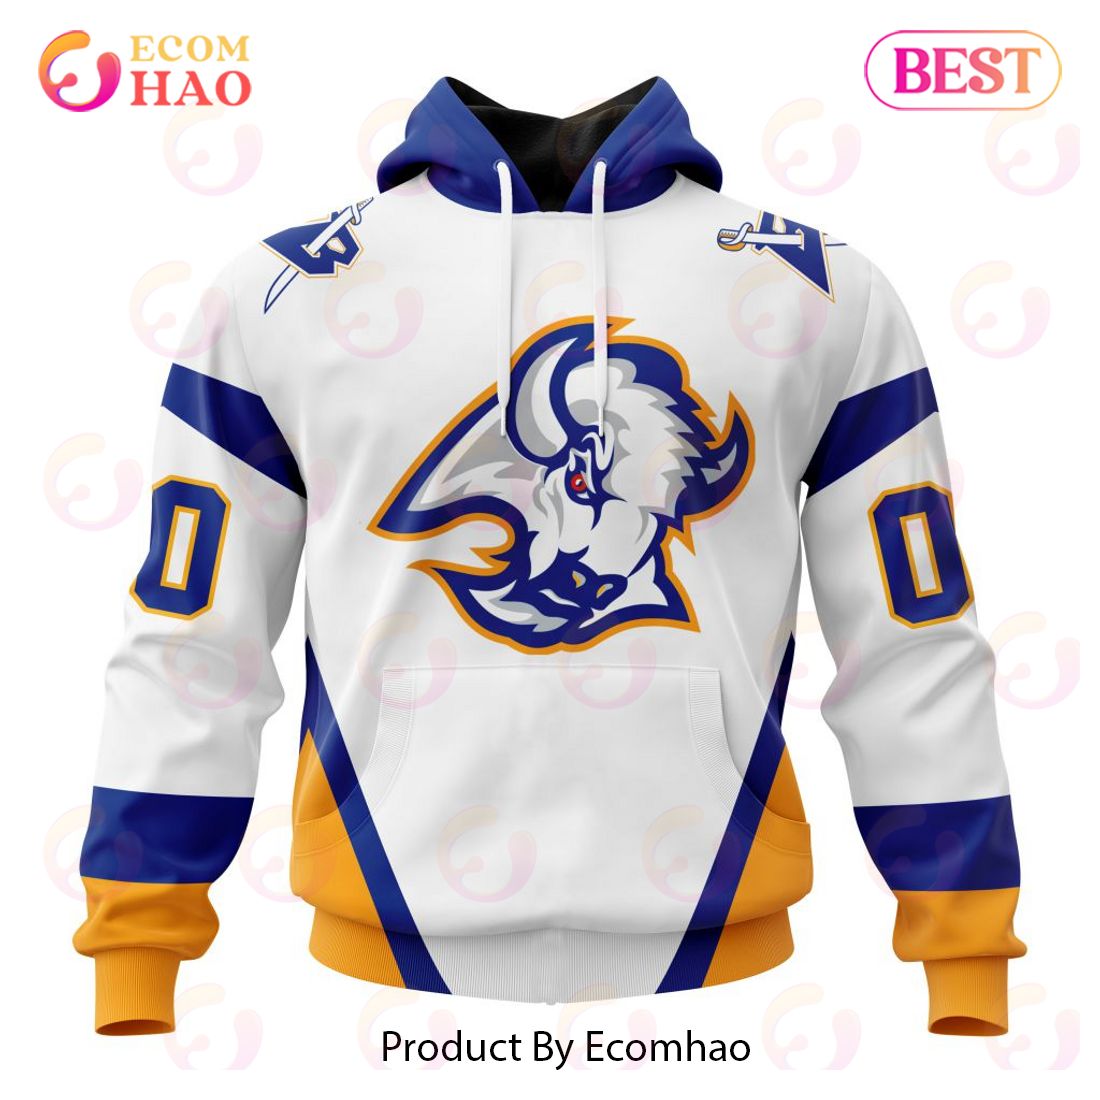 Sabres Reverse Retro Sweatshirt Alluring Buffalo Sabres Gift - Personalized  Gifts: Family, Sports, Occasions, Trending